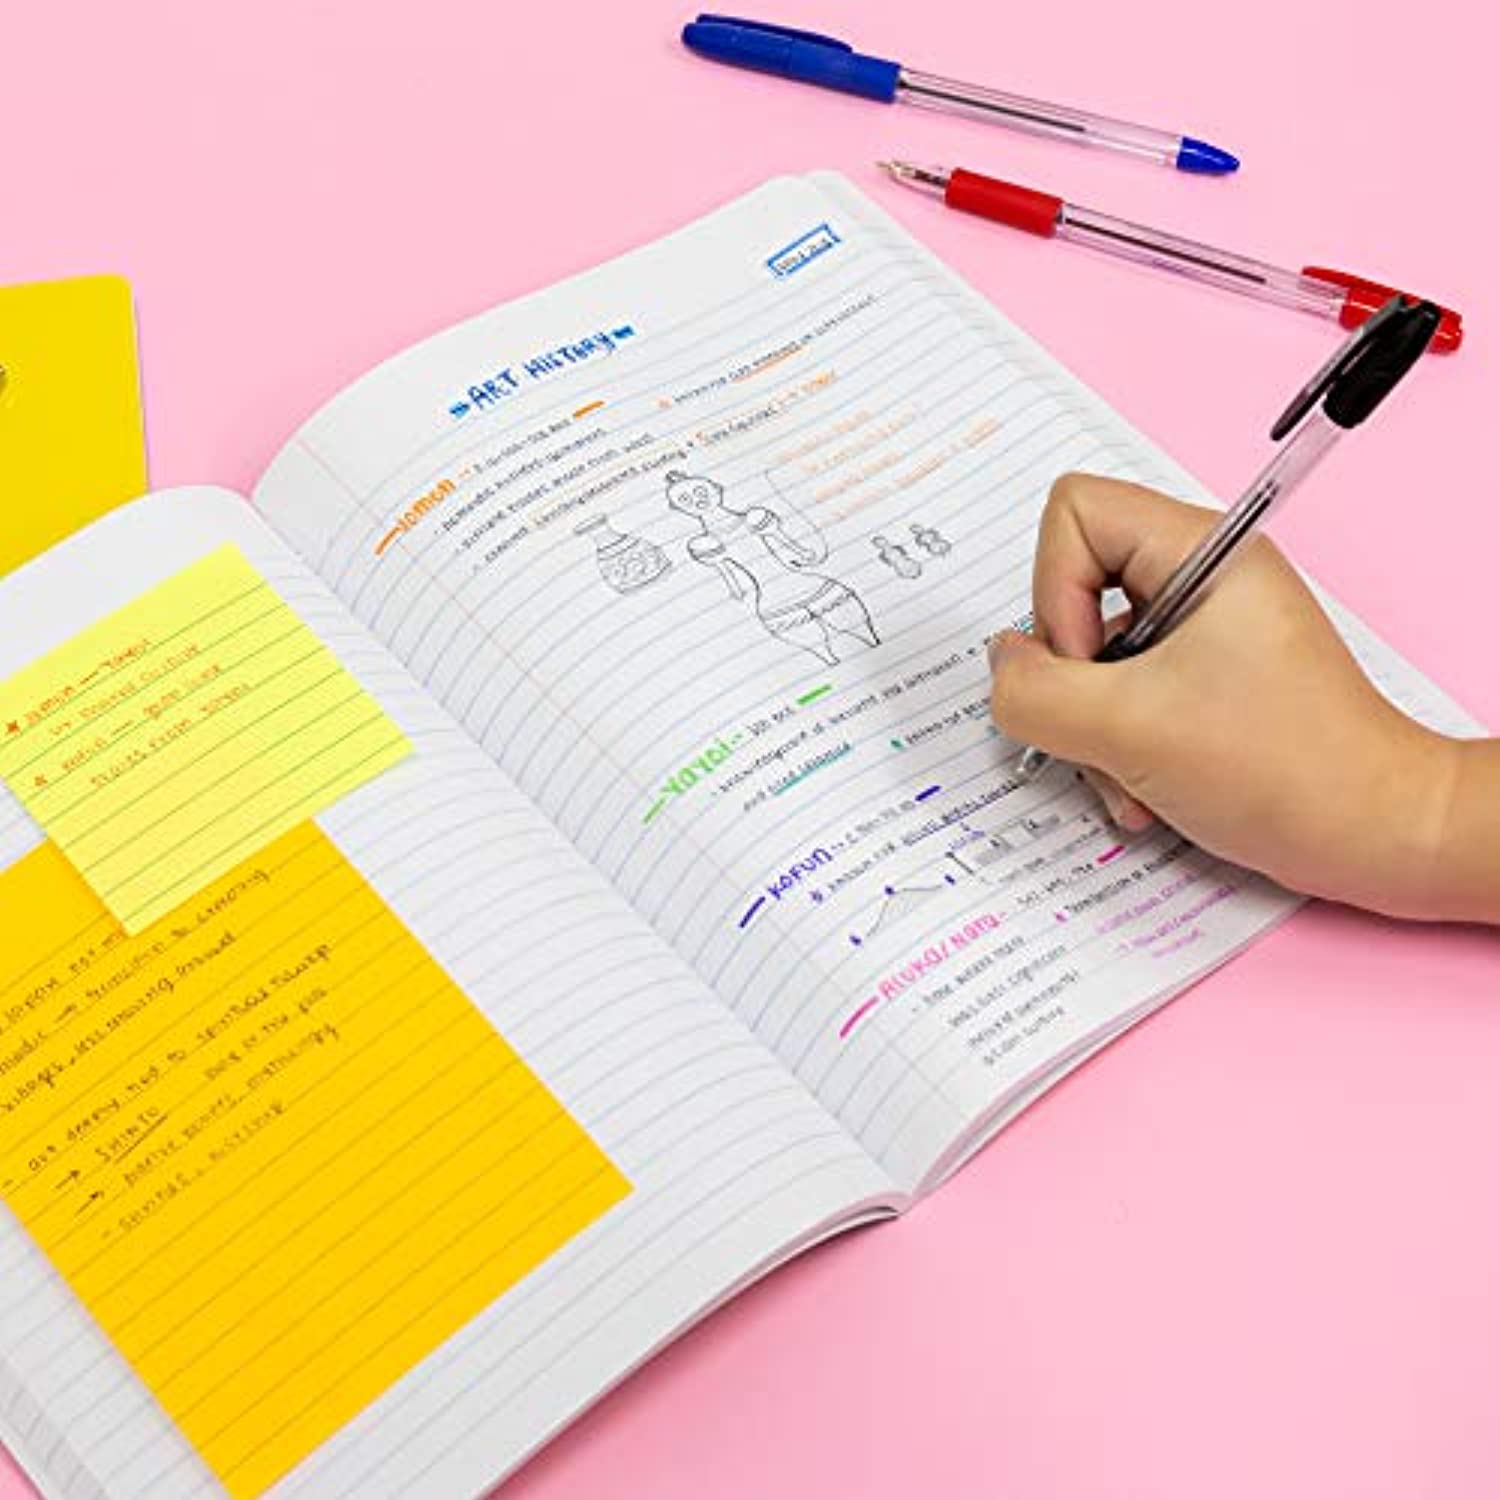 BAZIC College Ruled 70 Sheets Poly Cover Composition Book, Elegant Comp Books Writing Journal Notebook with Lined Paper, Home School Office Supplies for Student Class Schedule, 48-Pack.